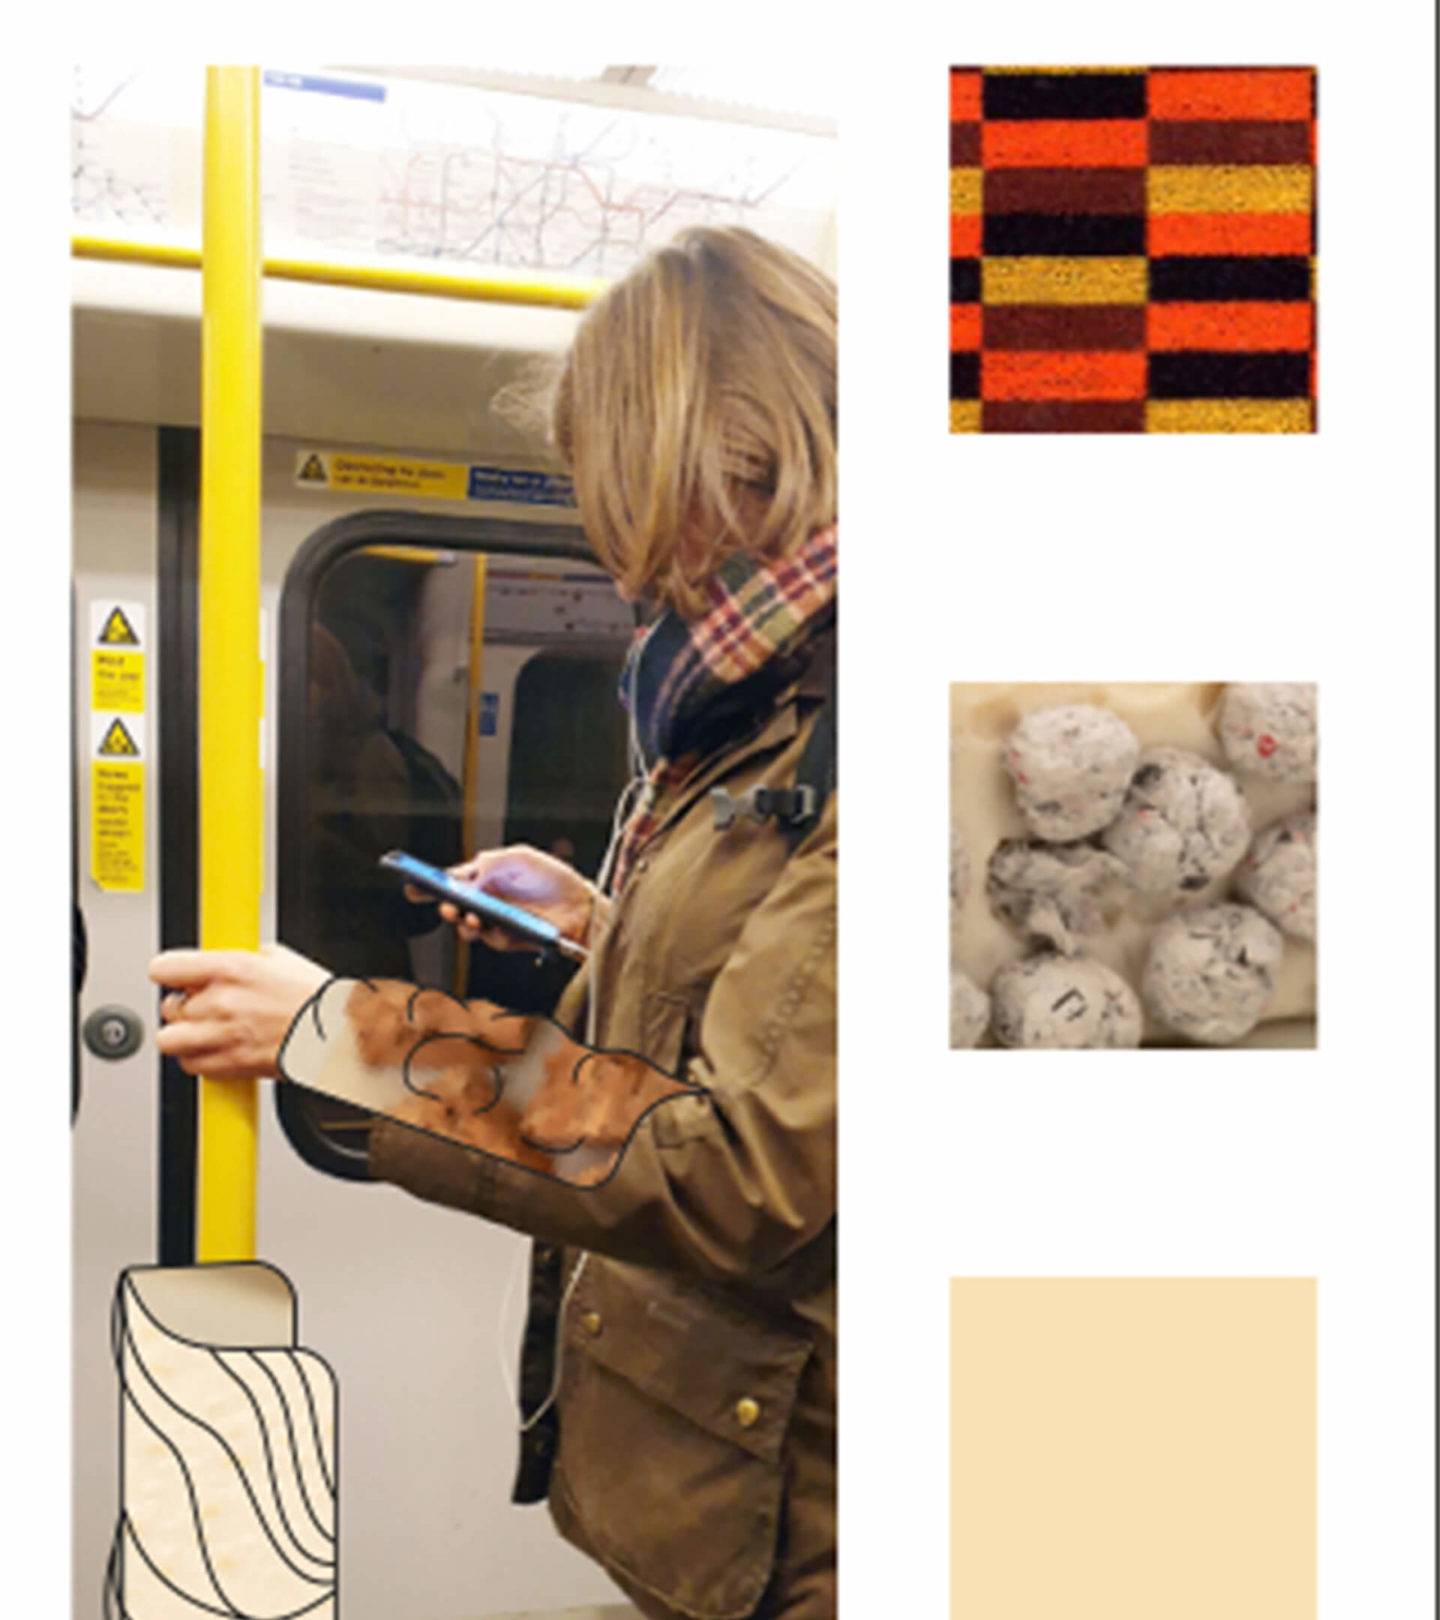 Materials samples and person standing on the tube